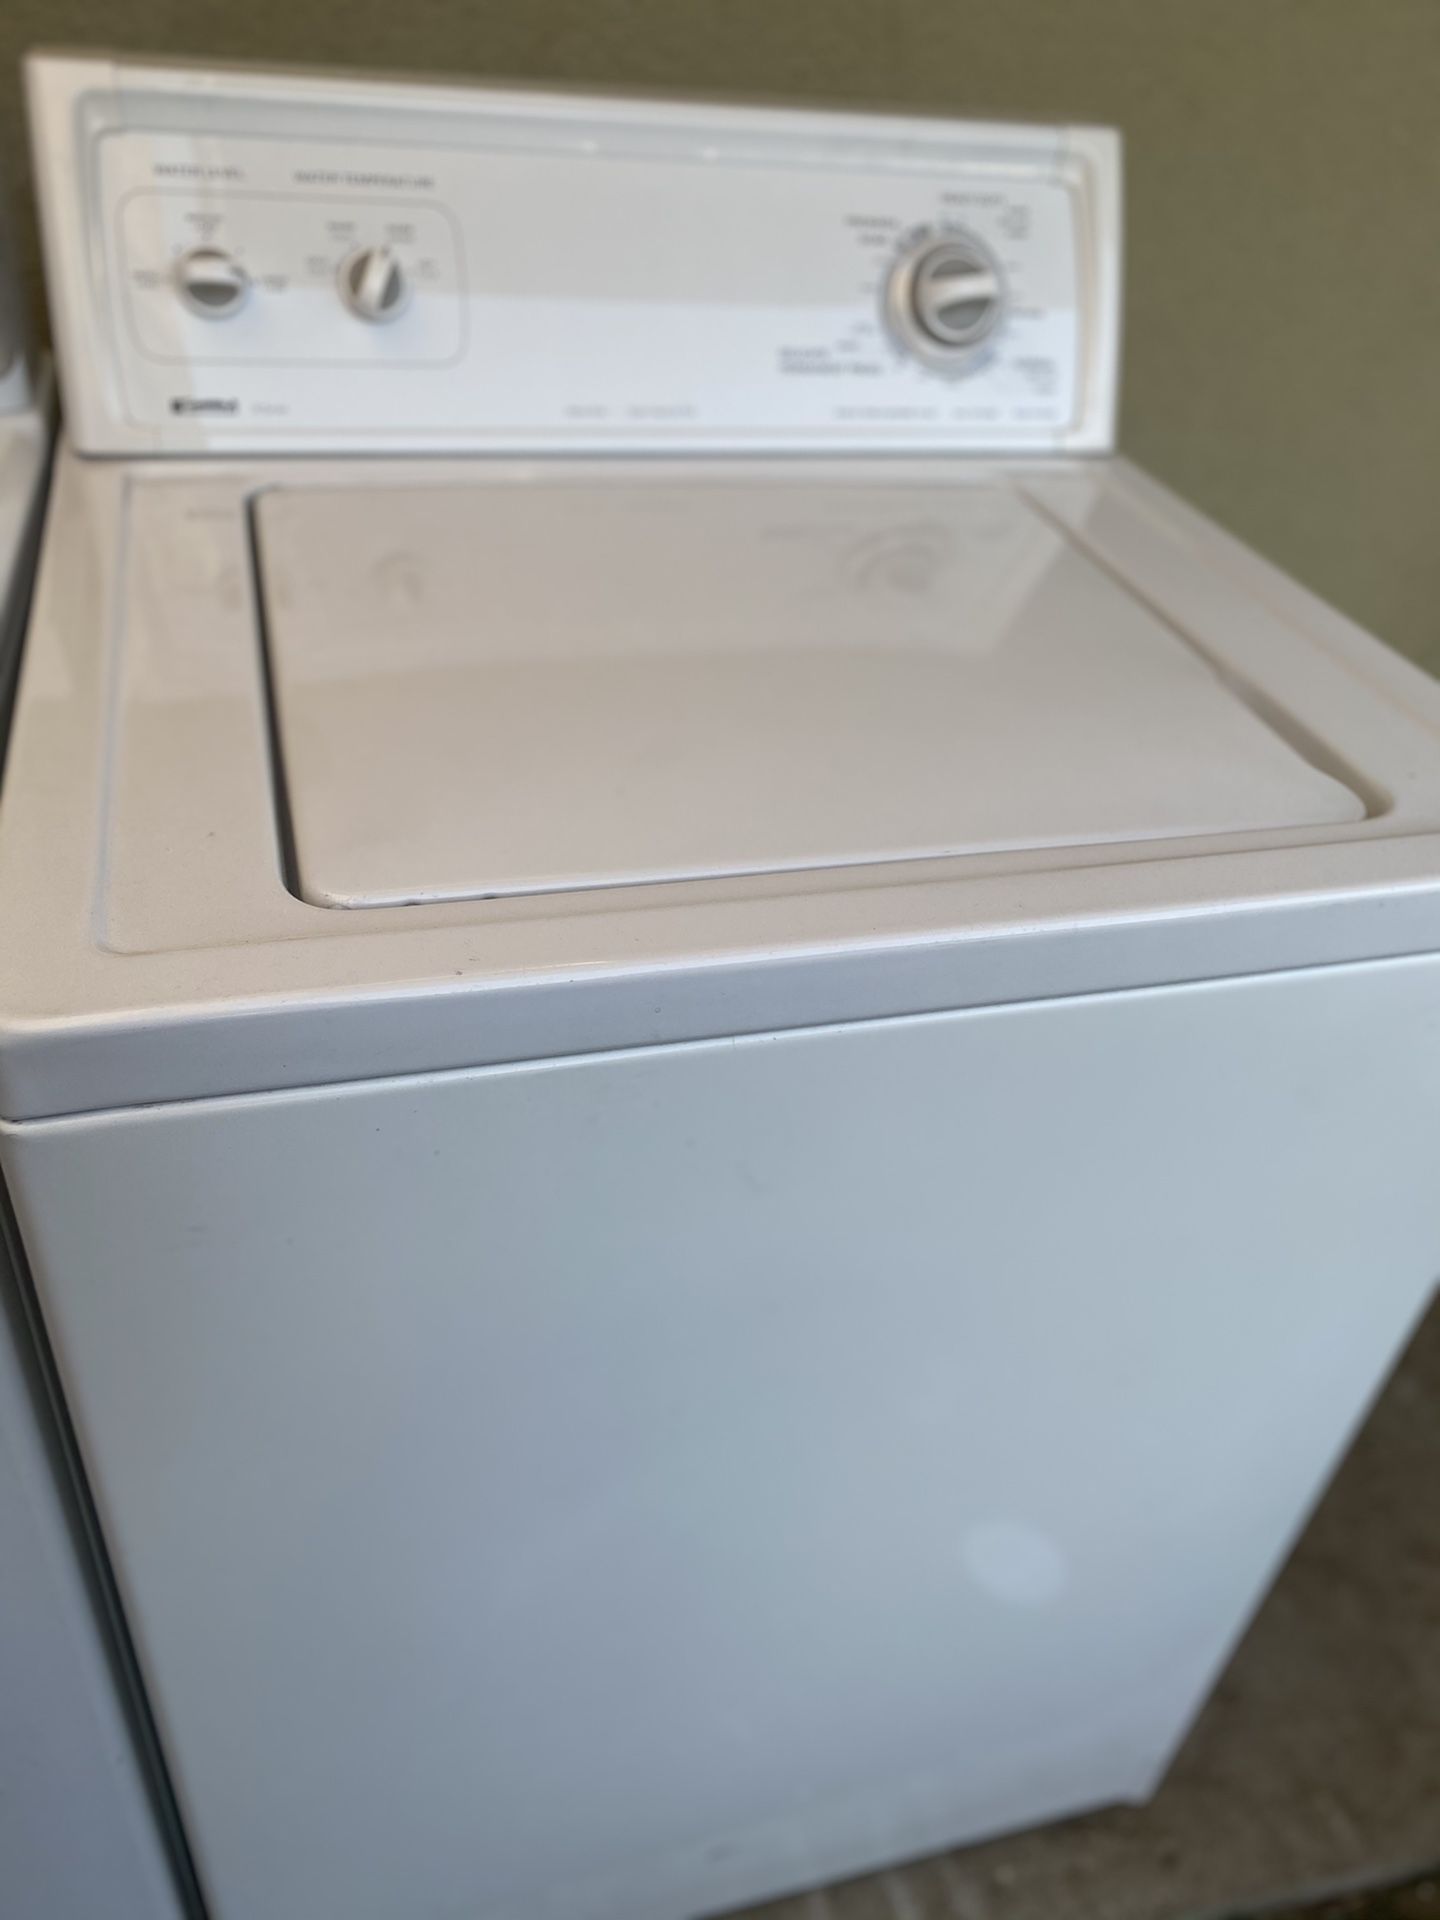 Washer Kenmore